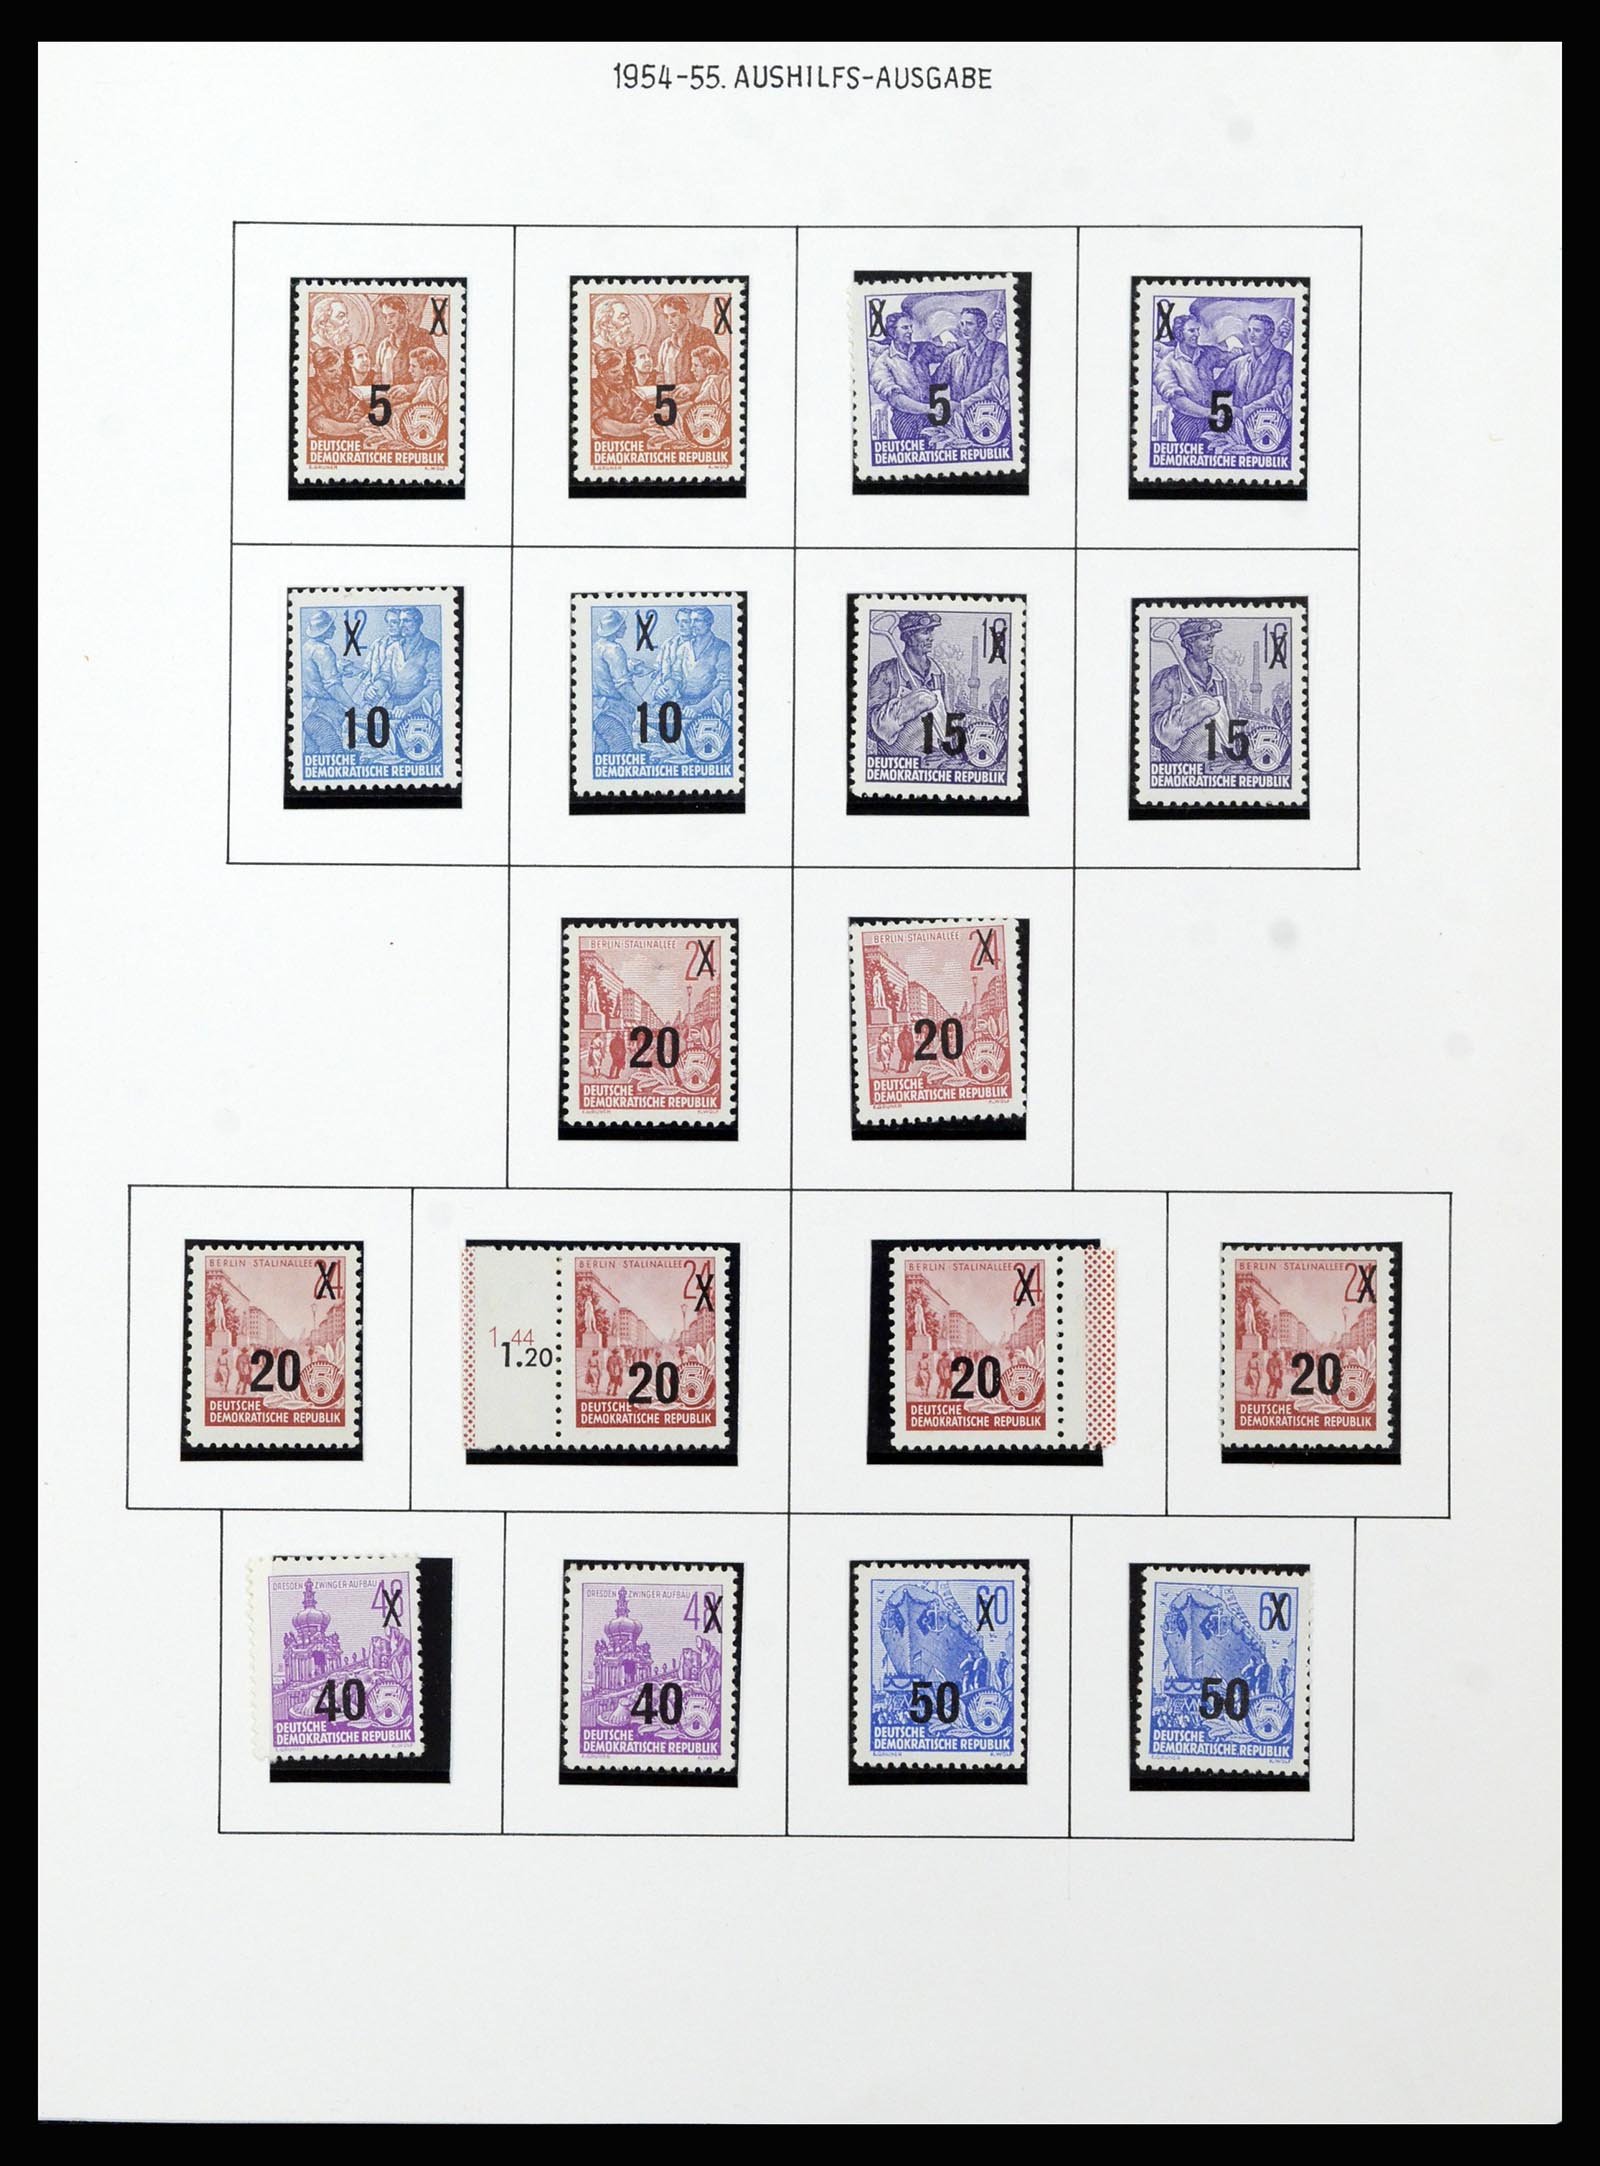 37101 001 - Stamp collection 37101 GDR 1954-1960.